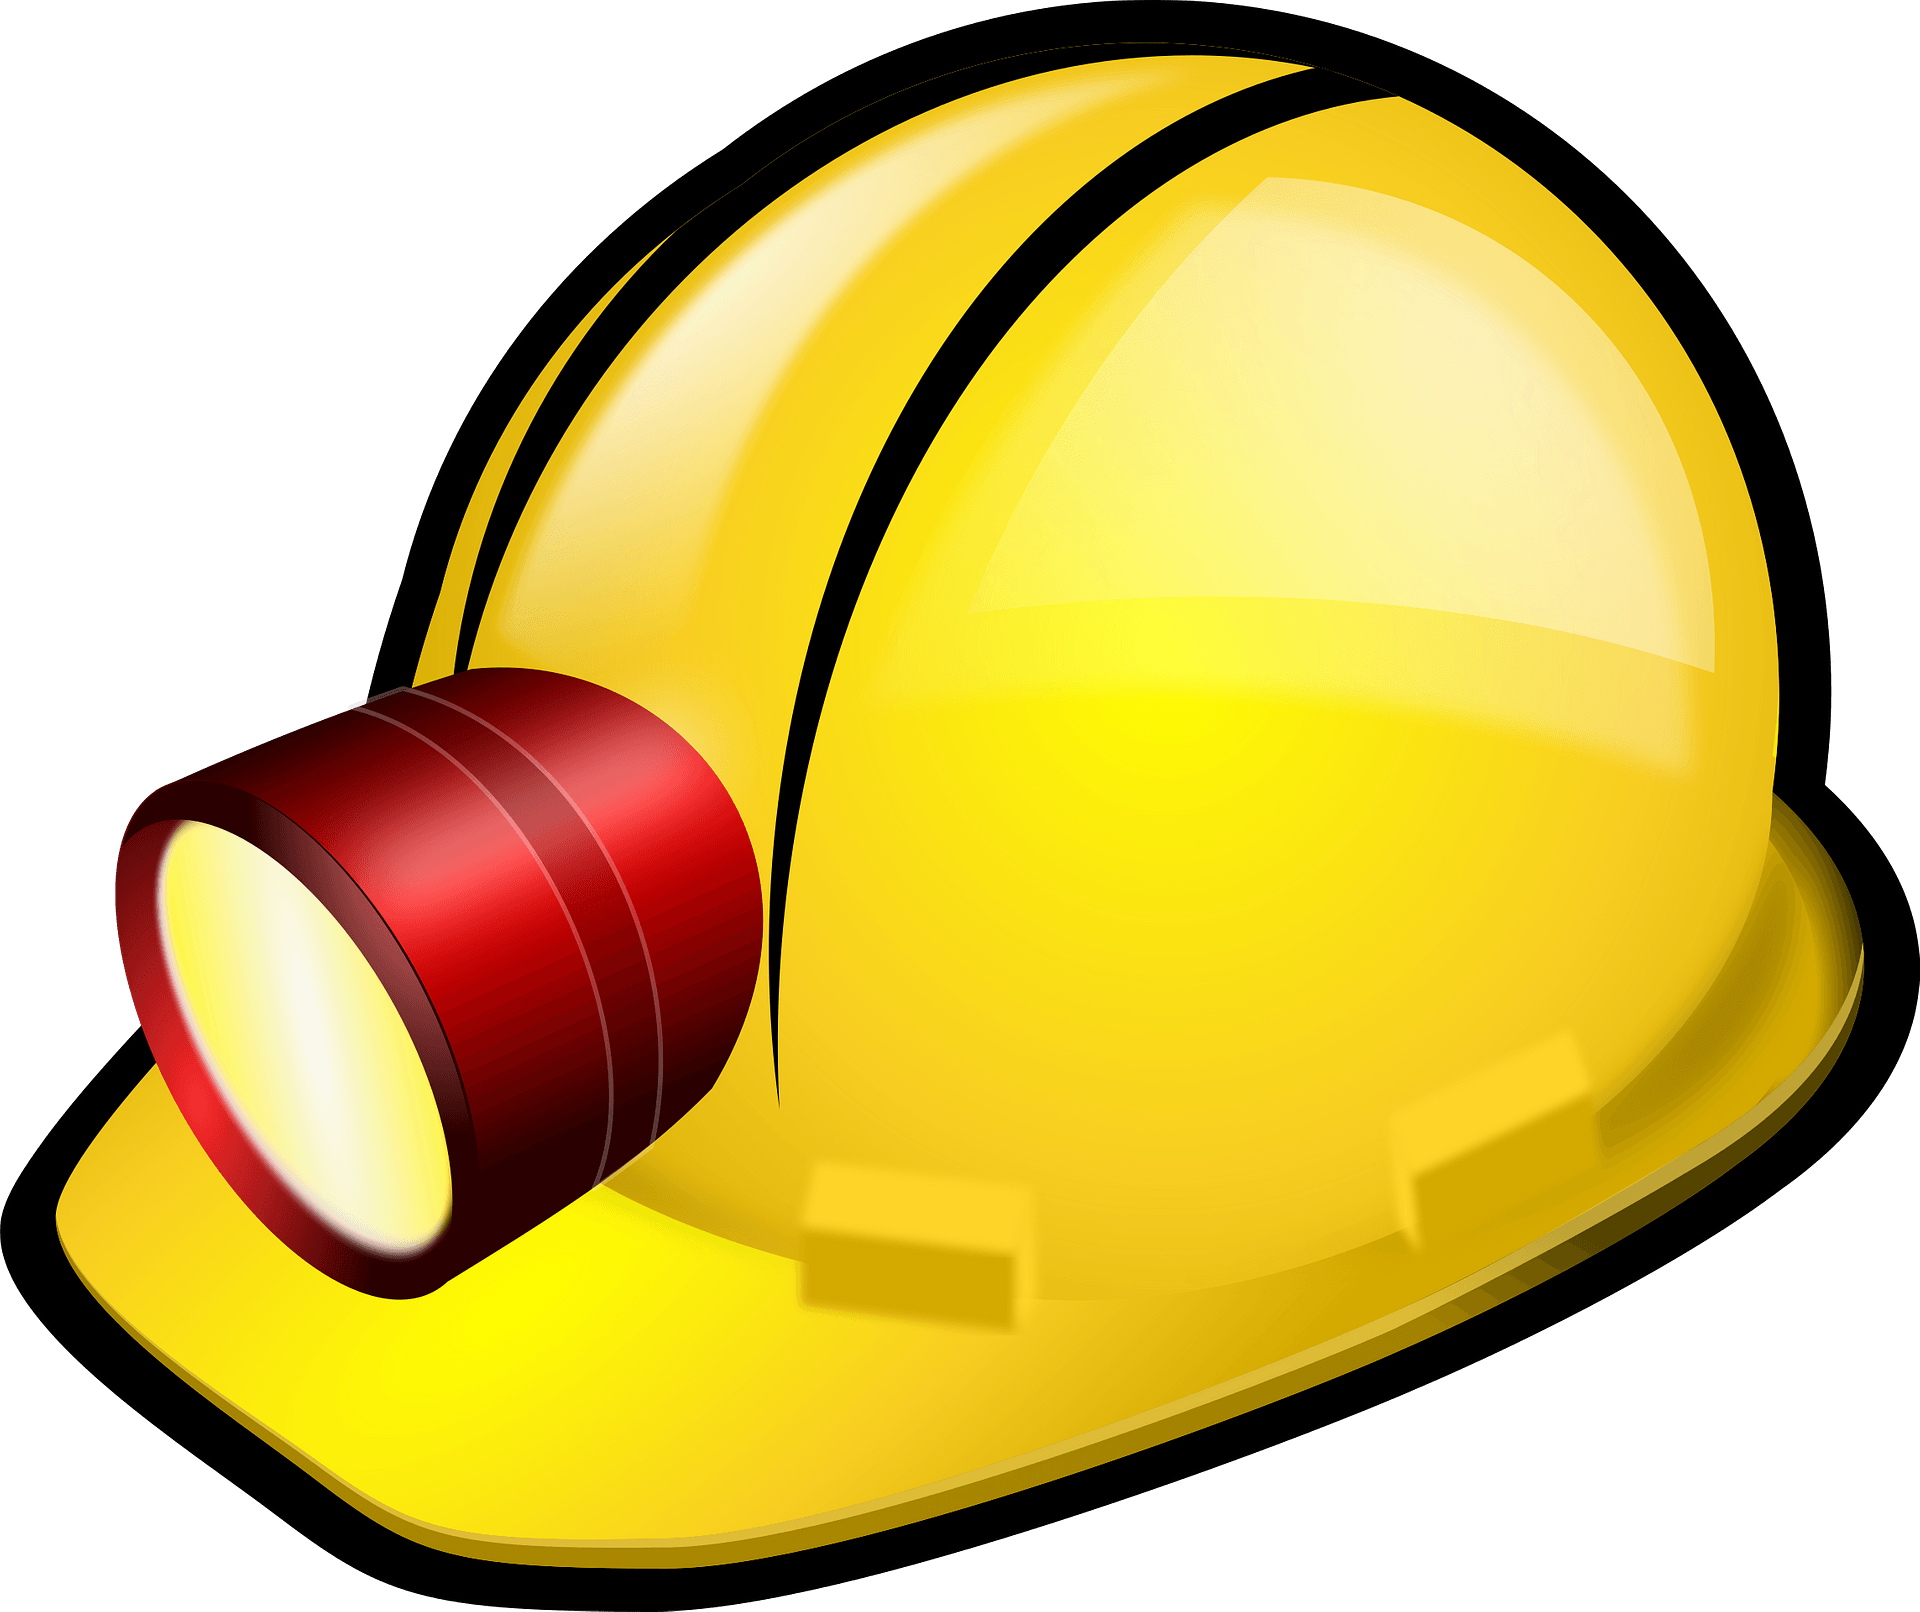 Free Construction Hats Download Free Construction Hats Png Images Free Cliparts On Clipart Library